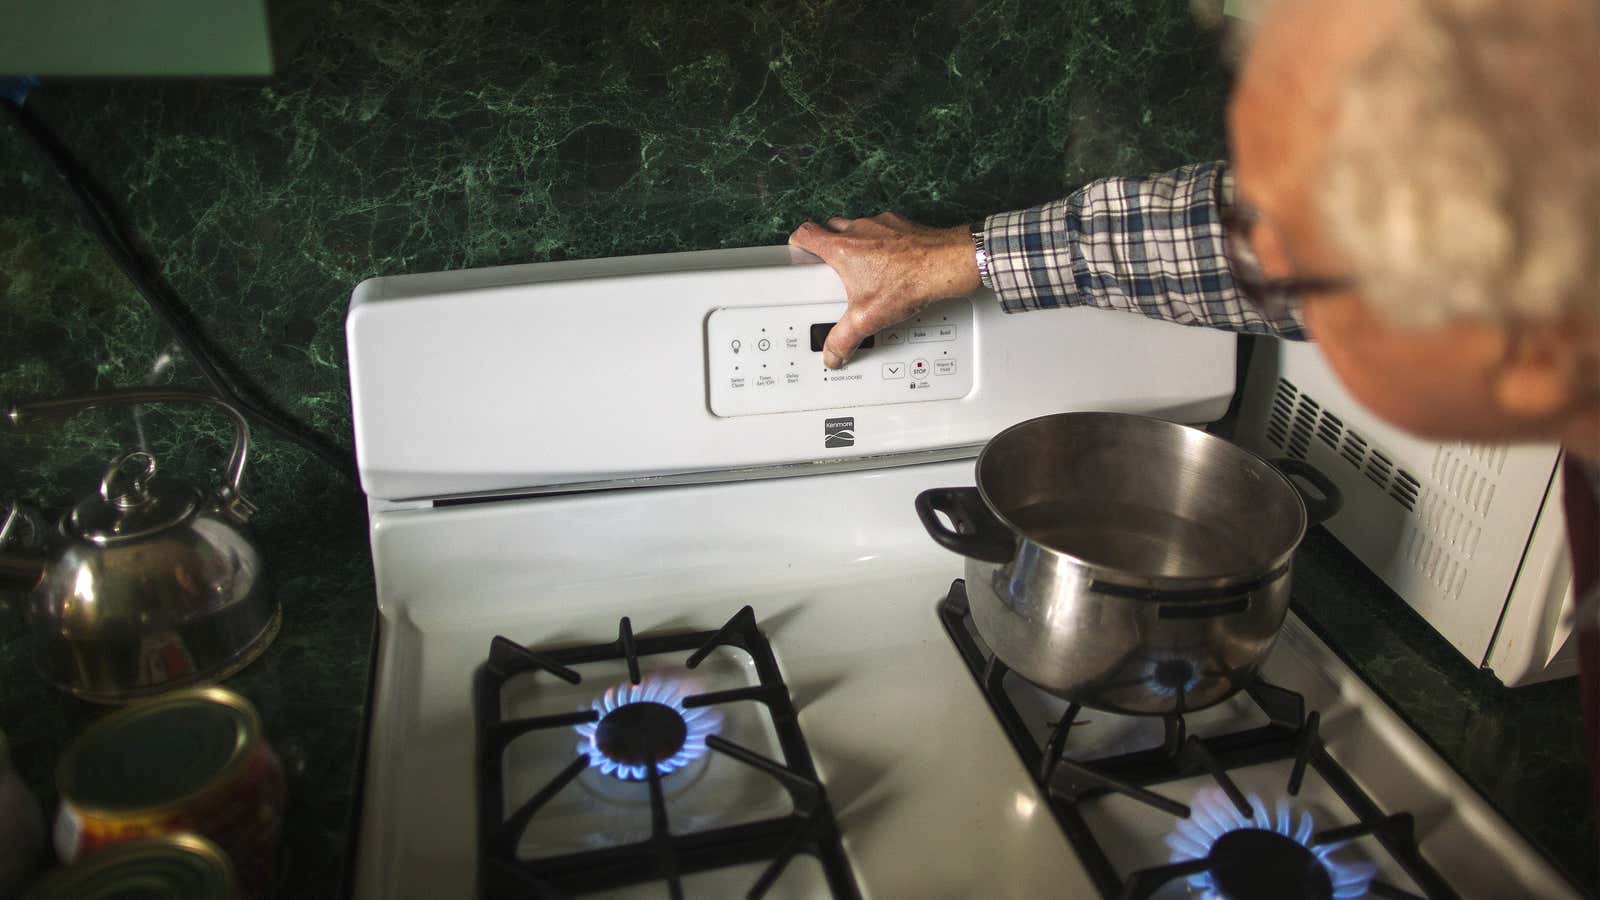 Gas stoves are a leading cause of indoor air pollution, especially in multifamily buildings.